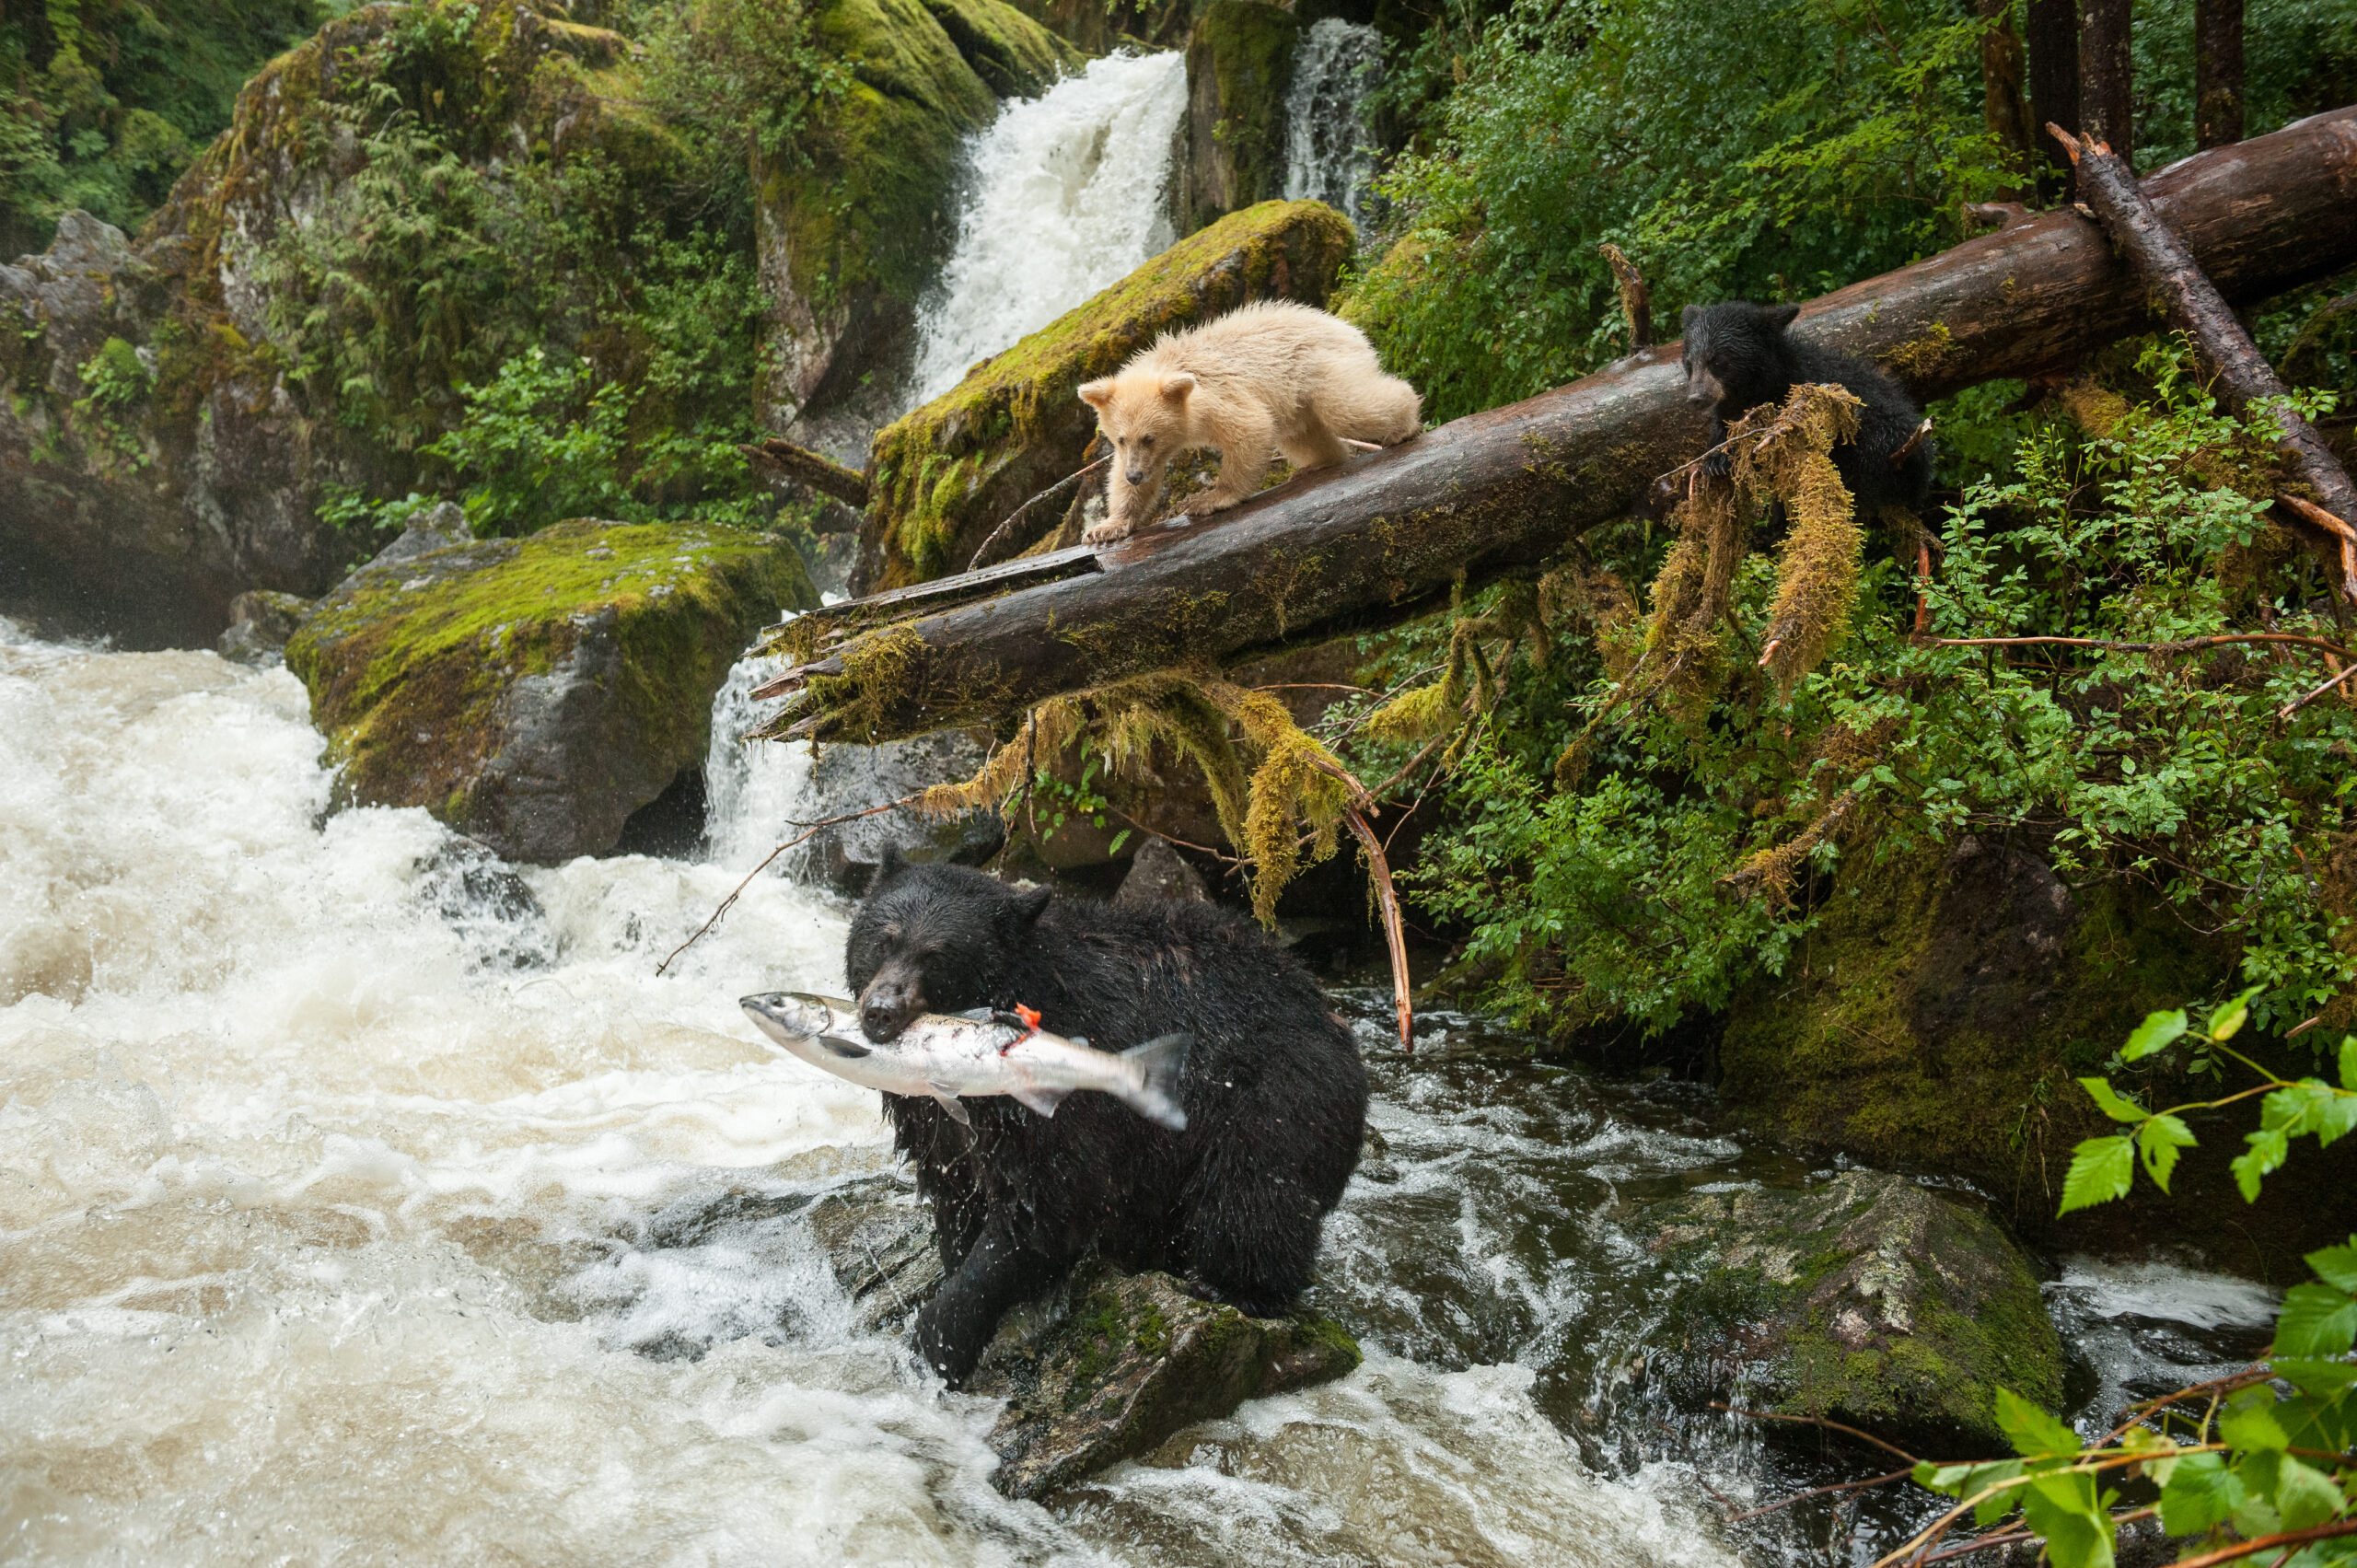 A black bear snags a salmon as her cub looks on. A white bear stands on a log looking into the river.